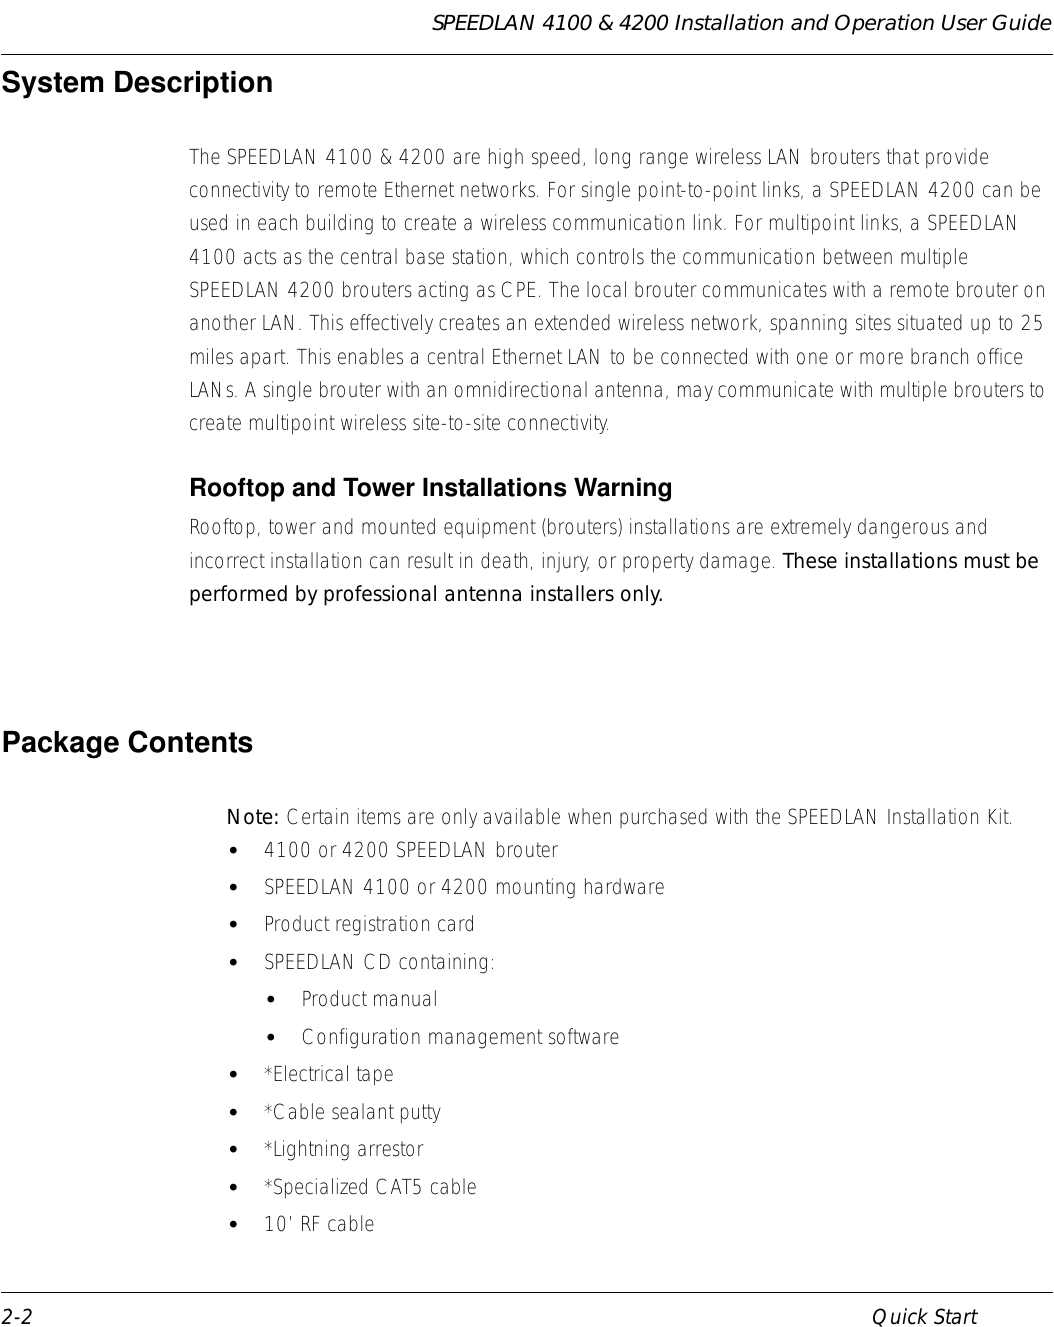 SPEEDLAN 4100 &amp; 4200 Installation and Operation User Guide 2-2 Quick StartSystem Description    The SPEEDLAN 4100 &amp; 4200 are high speed, long range wireless LAN brouters that provide connectivity to remote Ethernet networks. For single point-to-point links, a SPEEDLAN 4200 can be used in each building to create a wireless communication link. For multipoint links, a SPEEDLAN 4100 acts as the central base station, which controls the communication between multiple SPEEDLAN 4200 brouters acting as CPE. The local brouter communicates with a remote brouter on another LAN. This effectively creates an extended wireless network, spanning sites situated up to 25 miles apart. This enables a central Ethernet LAN to be connected with one or more branch office LANs. A single brouter with an omnidirectional antenna, may communicate with multiple brouters to create multipoint wireless site-to-site connectivity.    Rooftop and Tower Installations Warning Rooftop, tower and mounted equipment (brouters) installations are extremely dangerous and incorrect installation can result in death, injury, or property damage. These installations must be performed by professional antenna installers only.   Package Contents Note:    Certain items are only available when purchased with the SPEEDLAN Installation Kit. •4100 or 4200 SPEEDLAN brouter •SPEEDLAN 4100 or 4200 mounting hardware•Product registration card •SPEEDLAN CD containing: •Product manual •Configuration management software •*Electrical tape •*Cable sealant putty •*Lightning arrestor •*Specialized CAT5 cable•10’ RF cable             